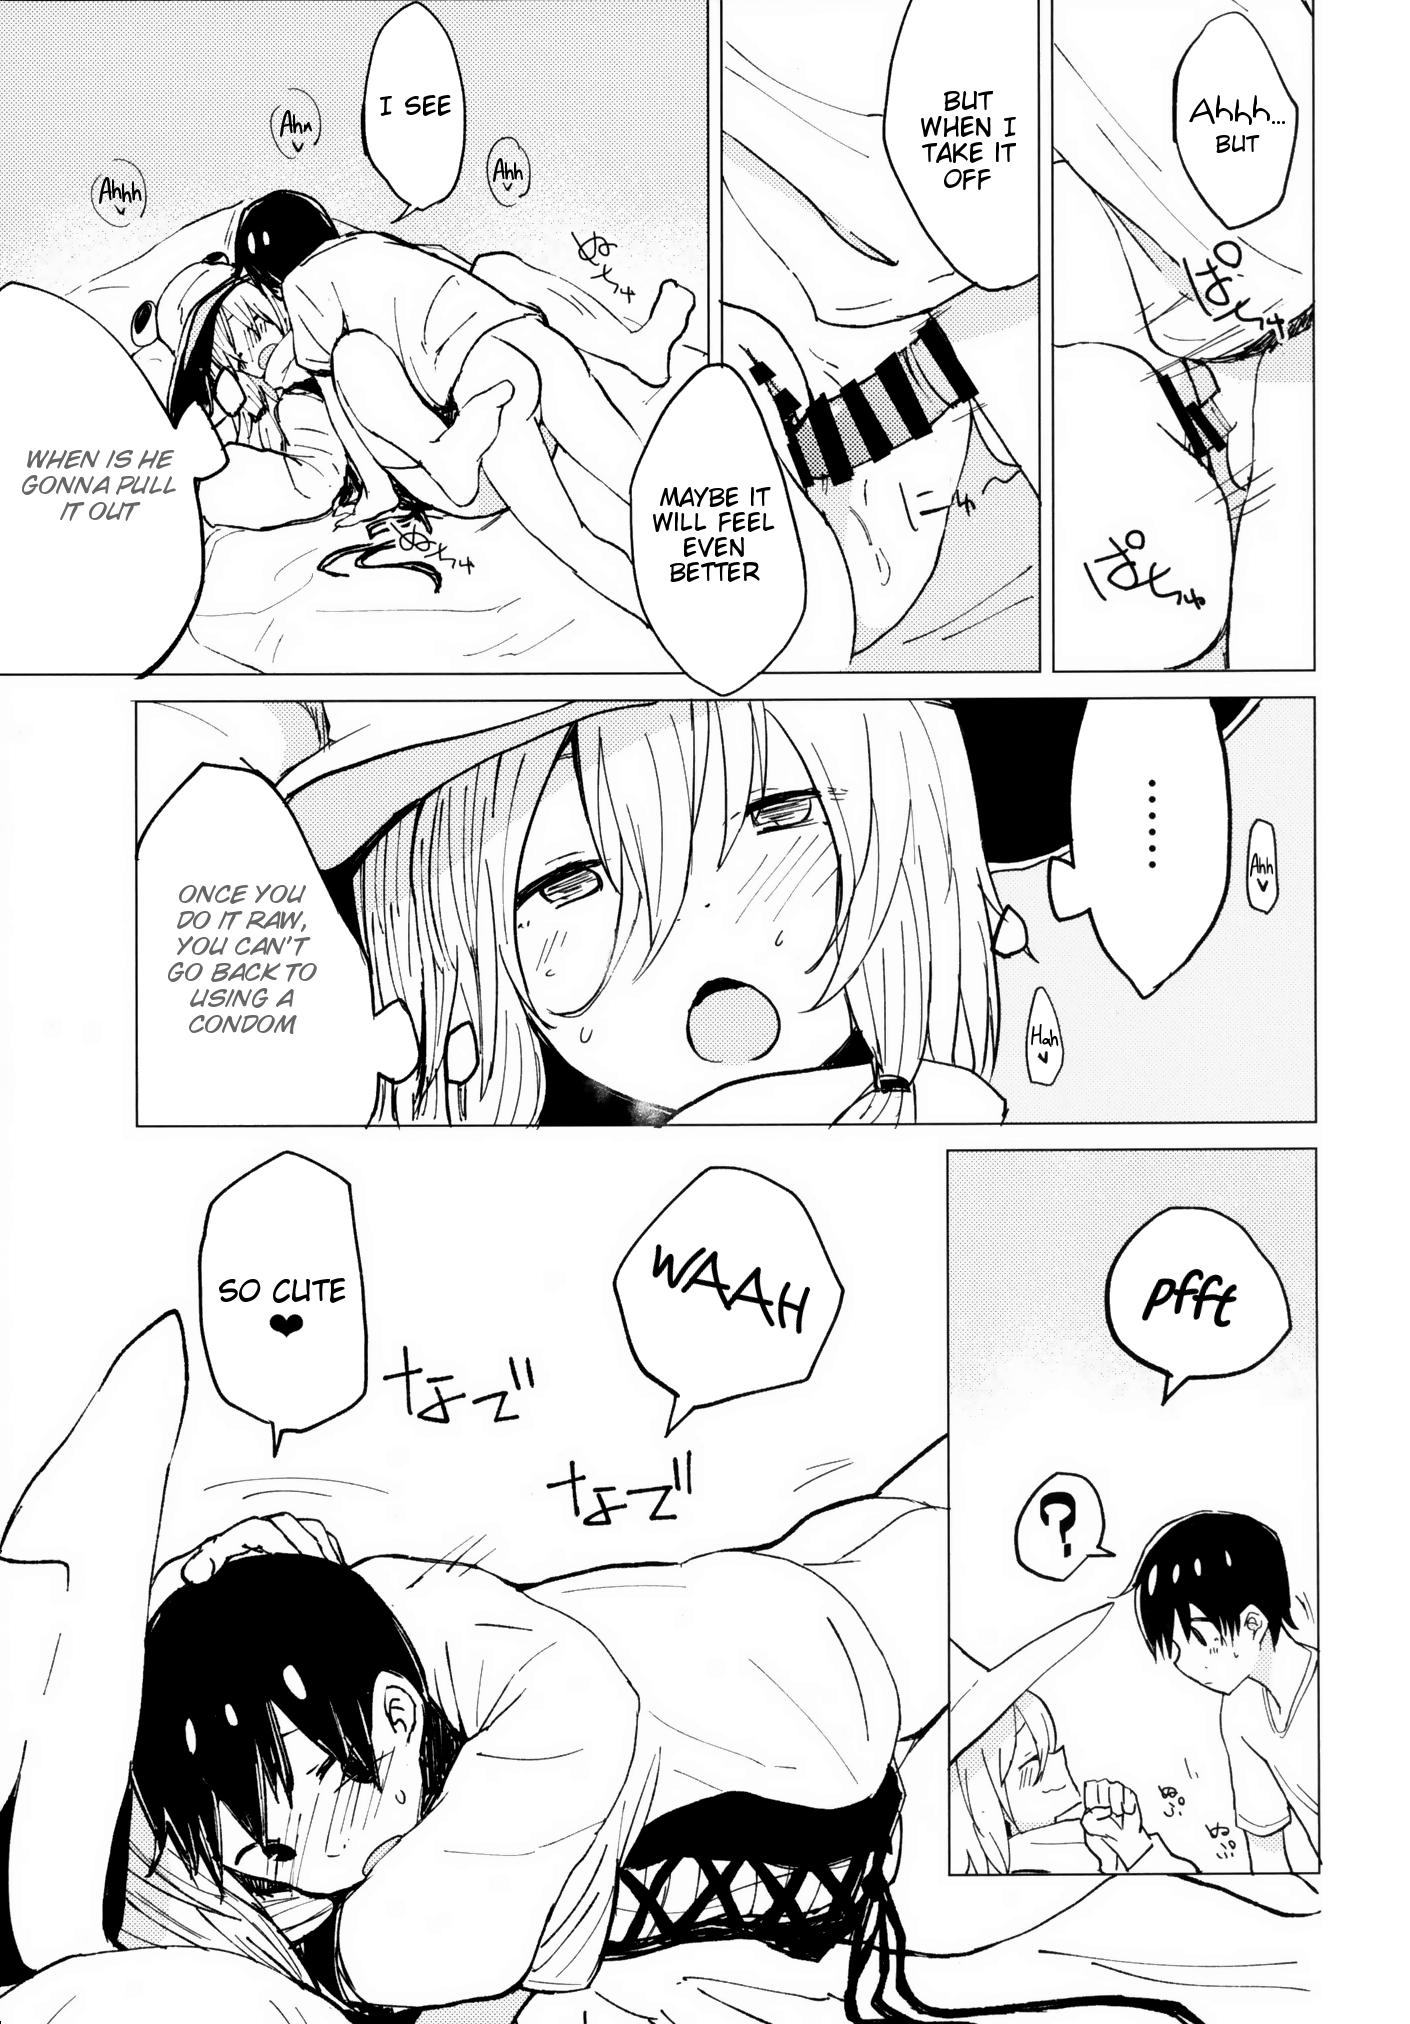 Trimmed Suwa Shota 4 - Touhou project Hot Whores - Page 10